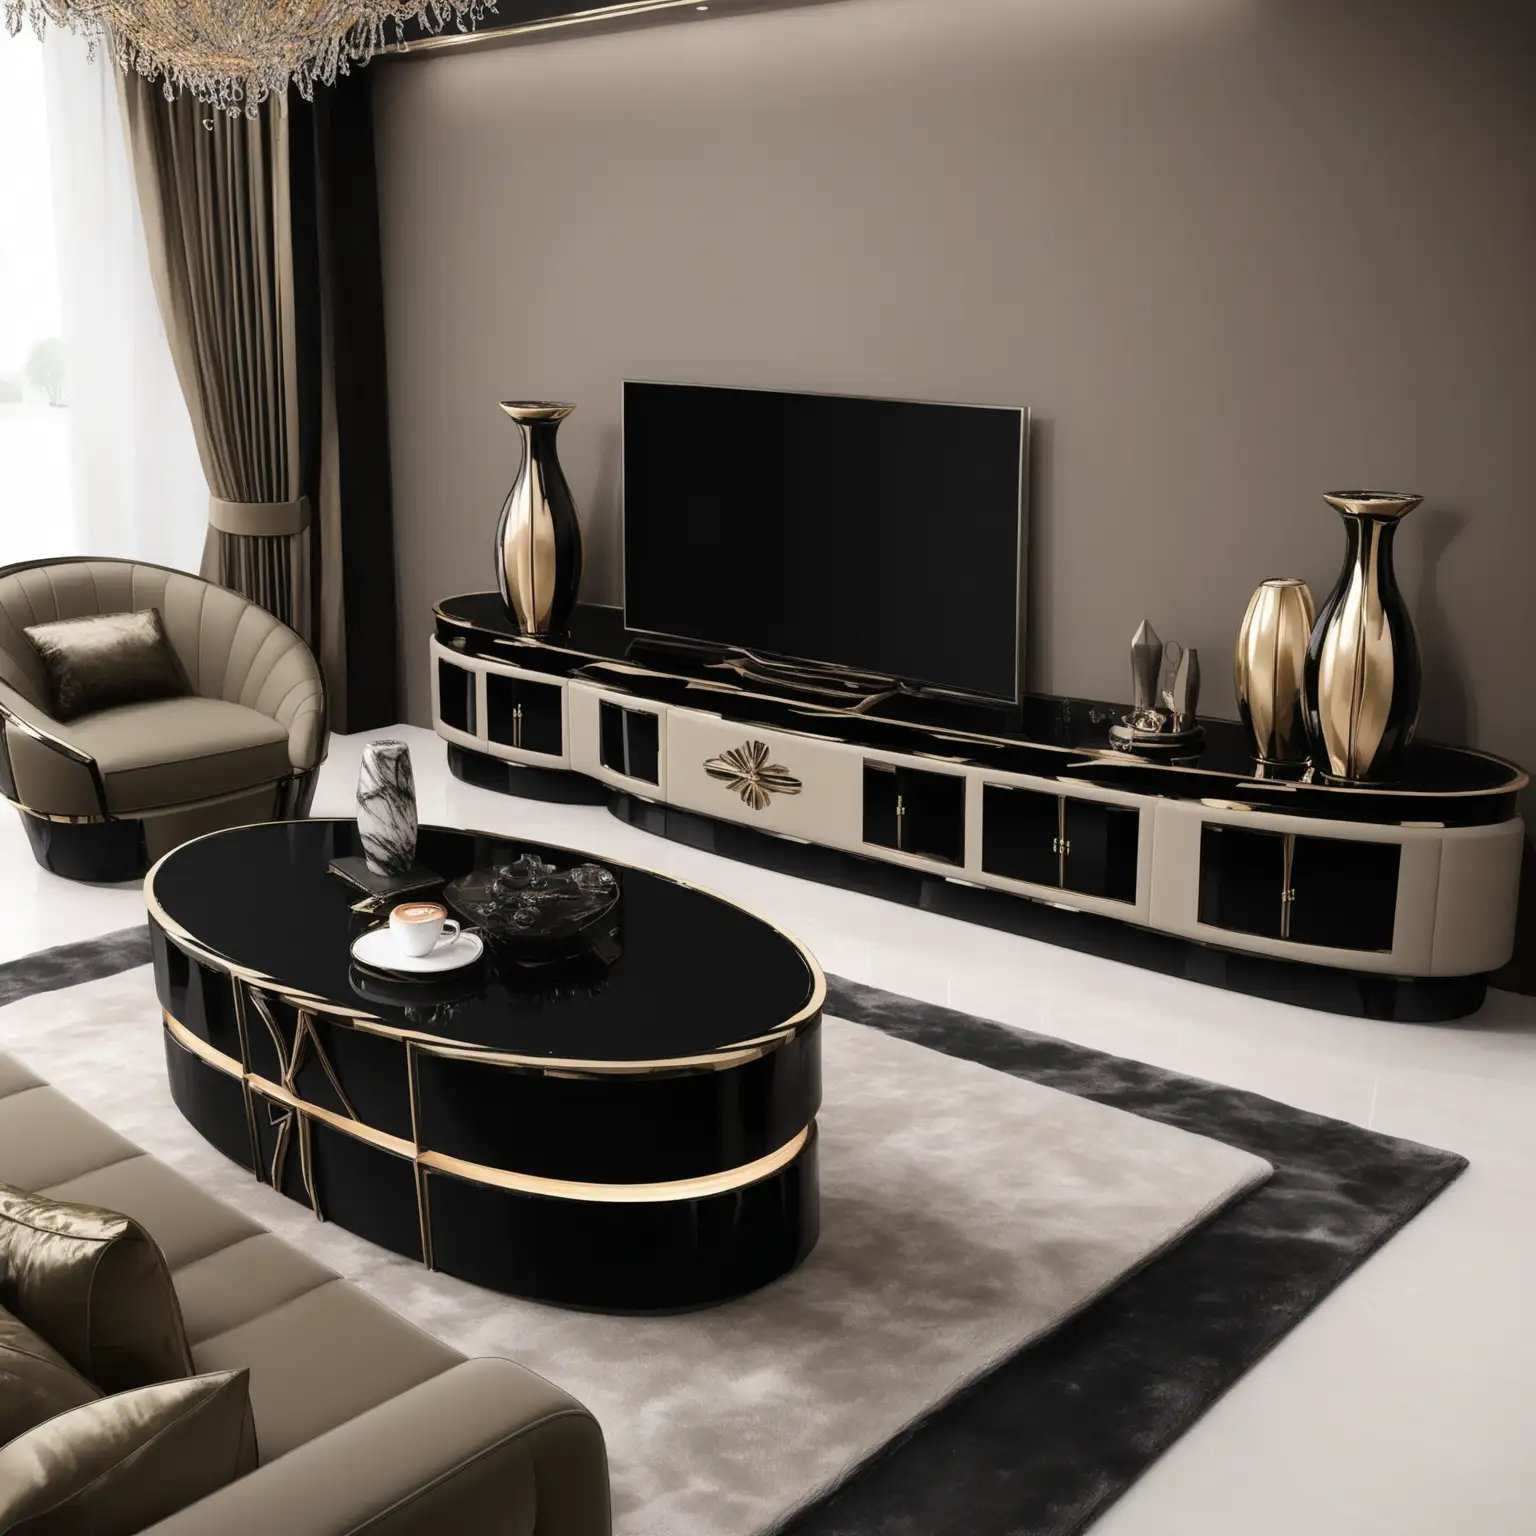 Luxurious Modern Living Room Furniture Set in Anthracite and Khaki Tones